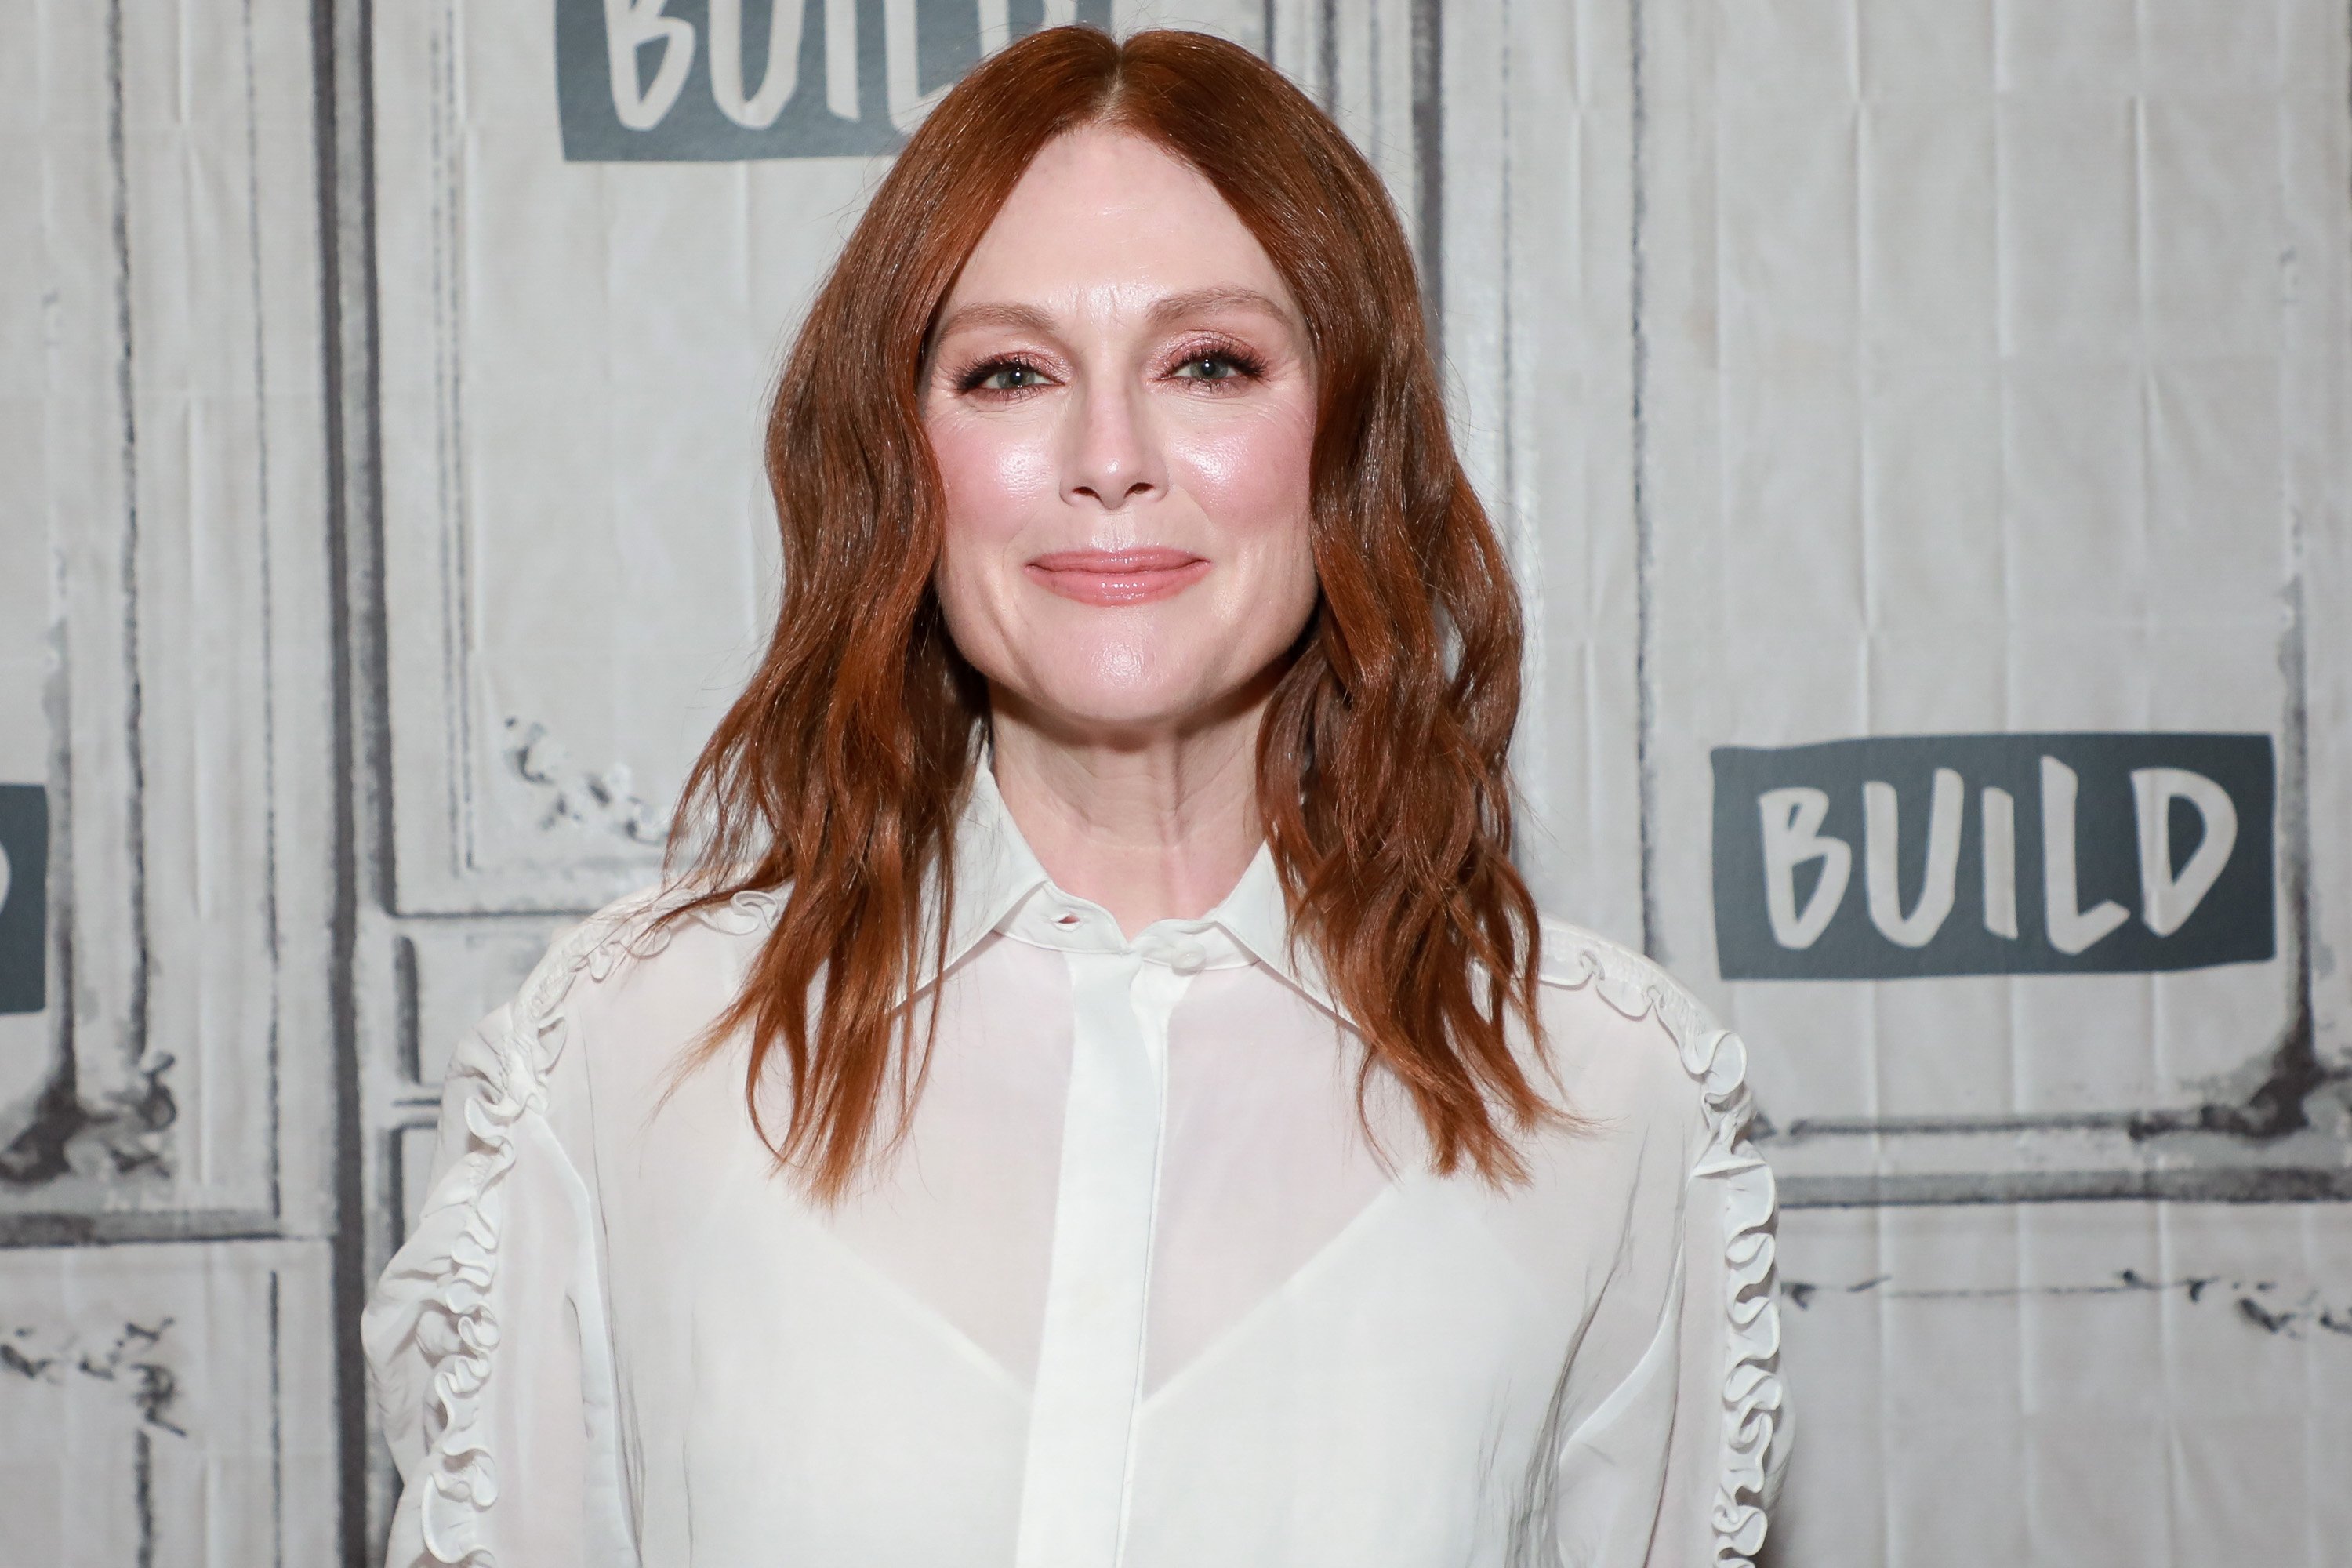 Oscar-winning actress Julianne Moore attends the 2019 online show called "Build Series." | Photo: Getty Images